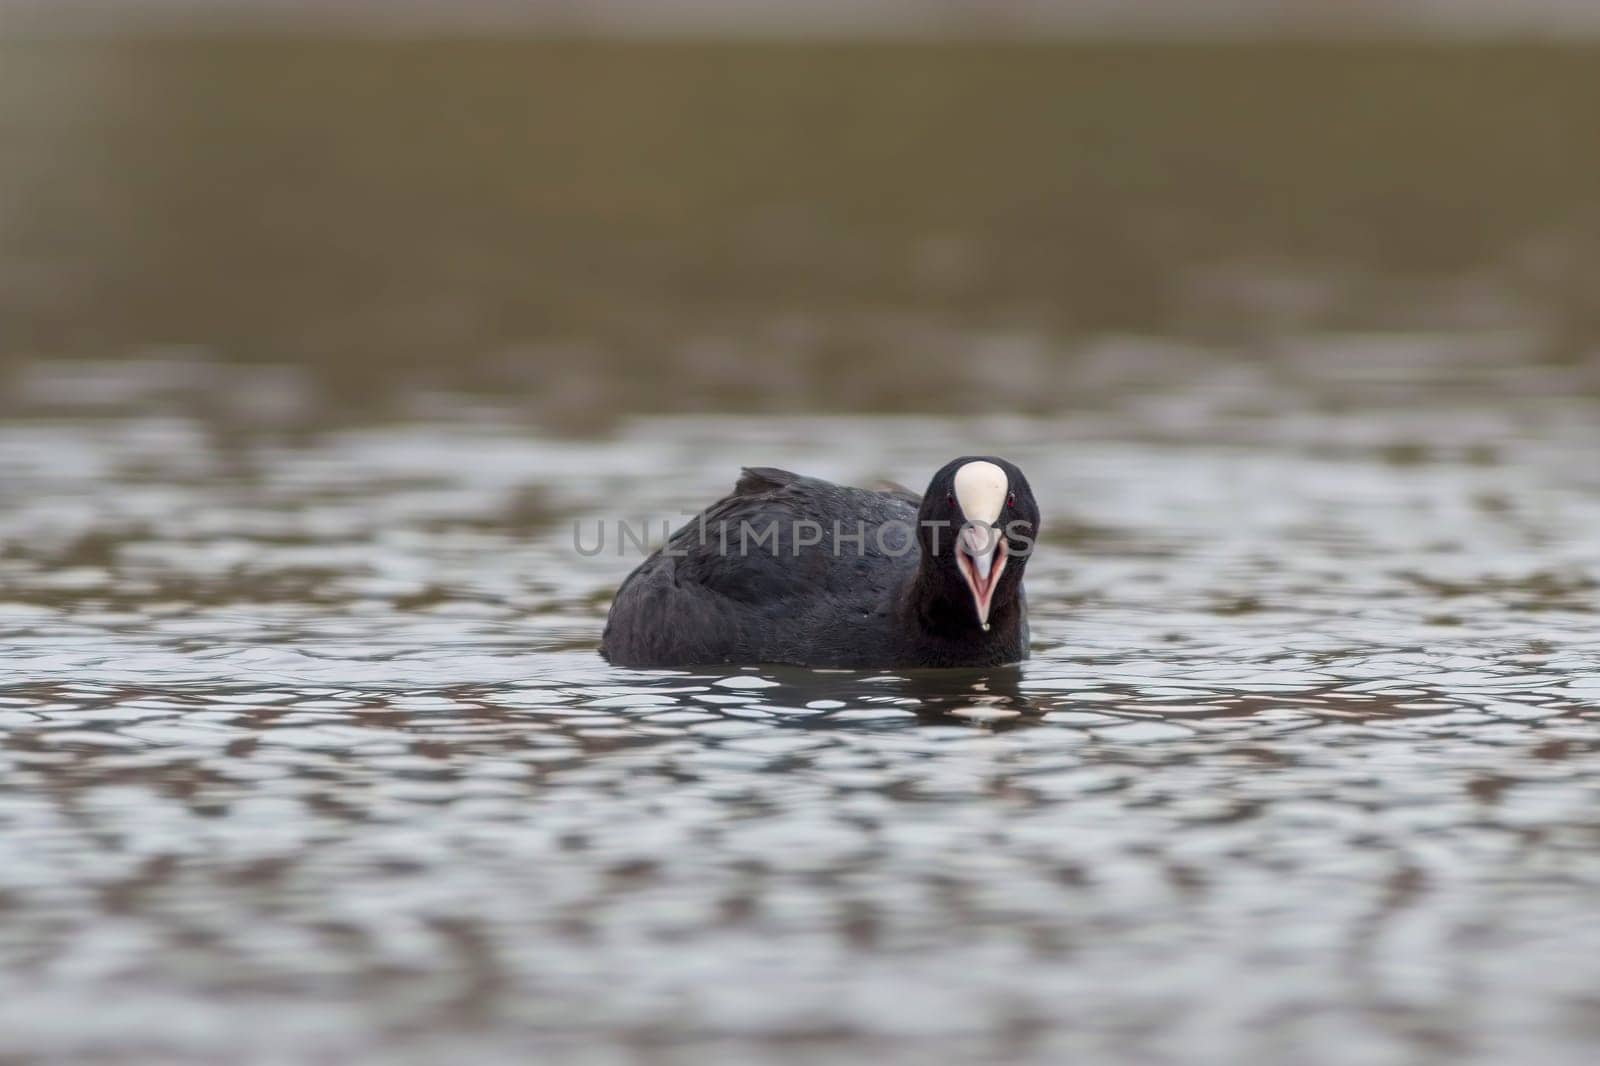 one adult coot (Fulica atra) swims on a reflecting lake by mario_plechaty_photography